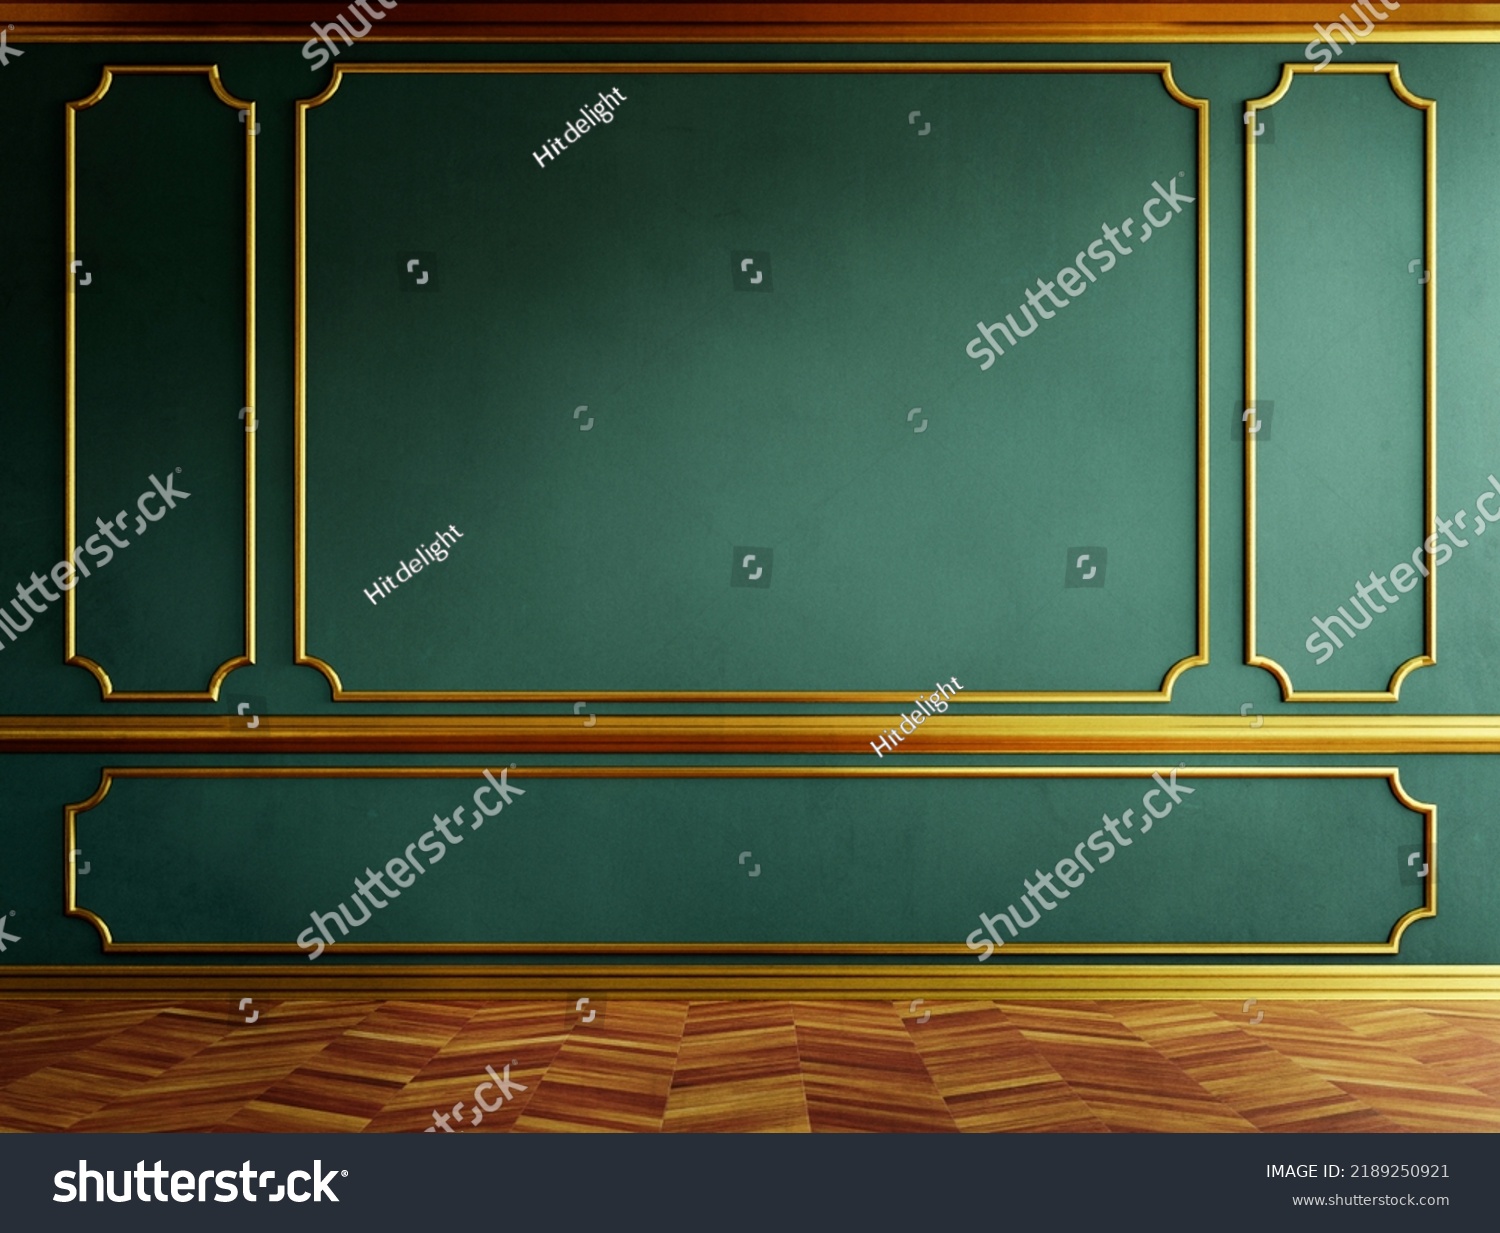 Stock Photo Luxury Room Interior With Golden Molding Decor And Blue Wall In Vintage Style Classical 2189250921 